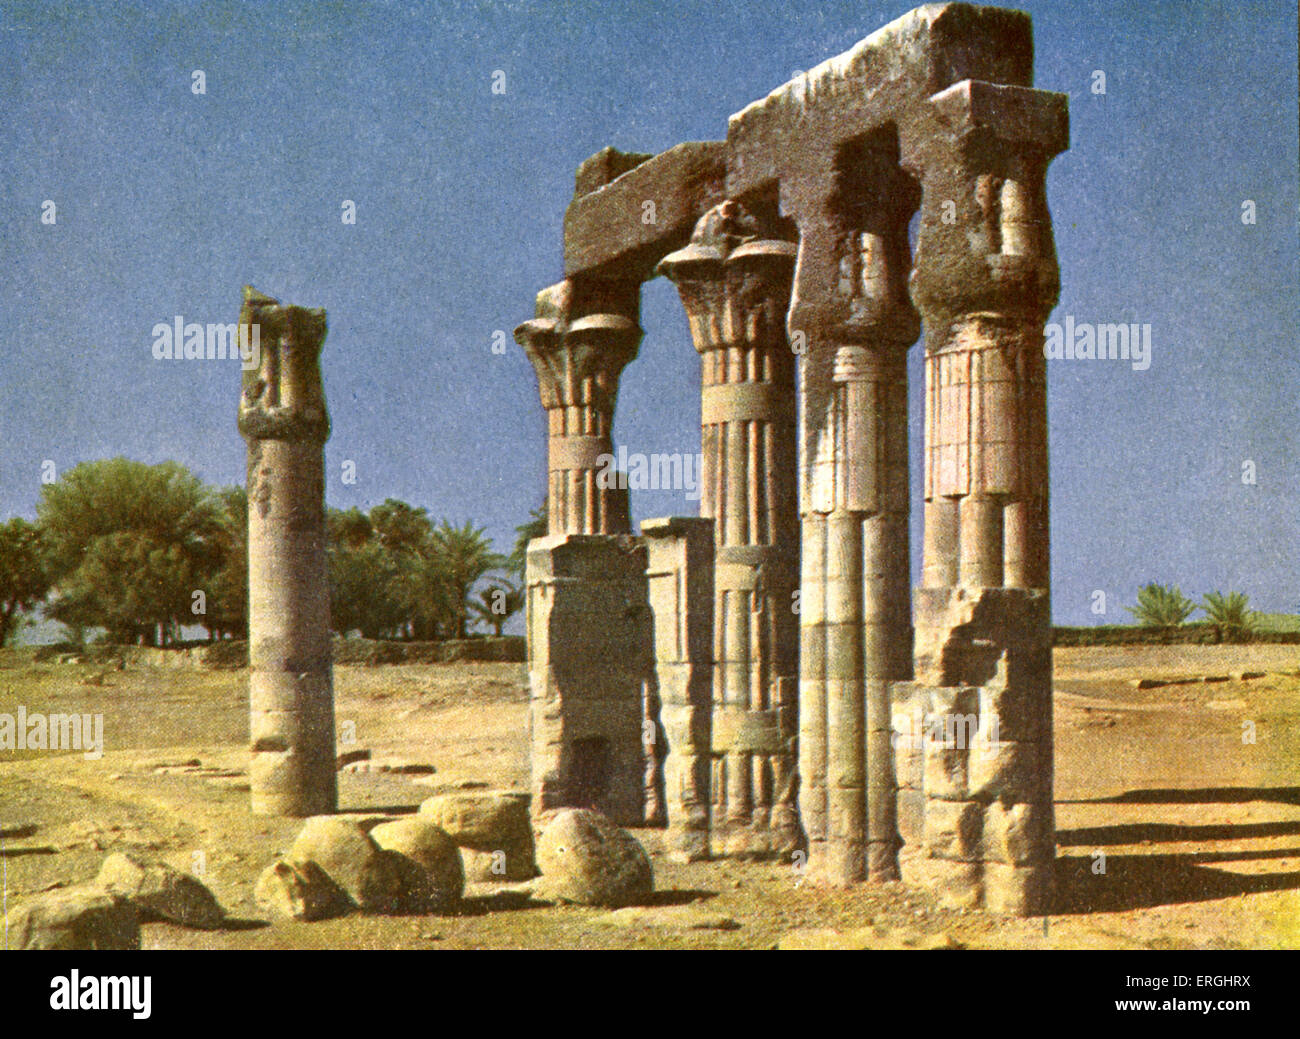 Ruined temple at Medamut, Egypt. Photograph from 1923 book. Stock Photo